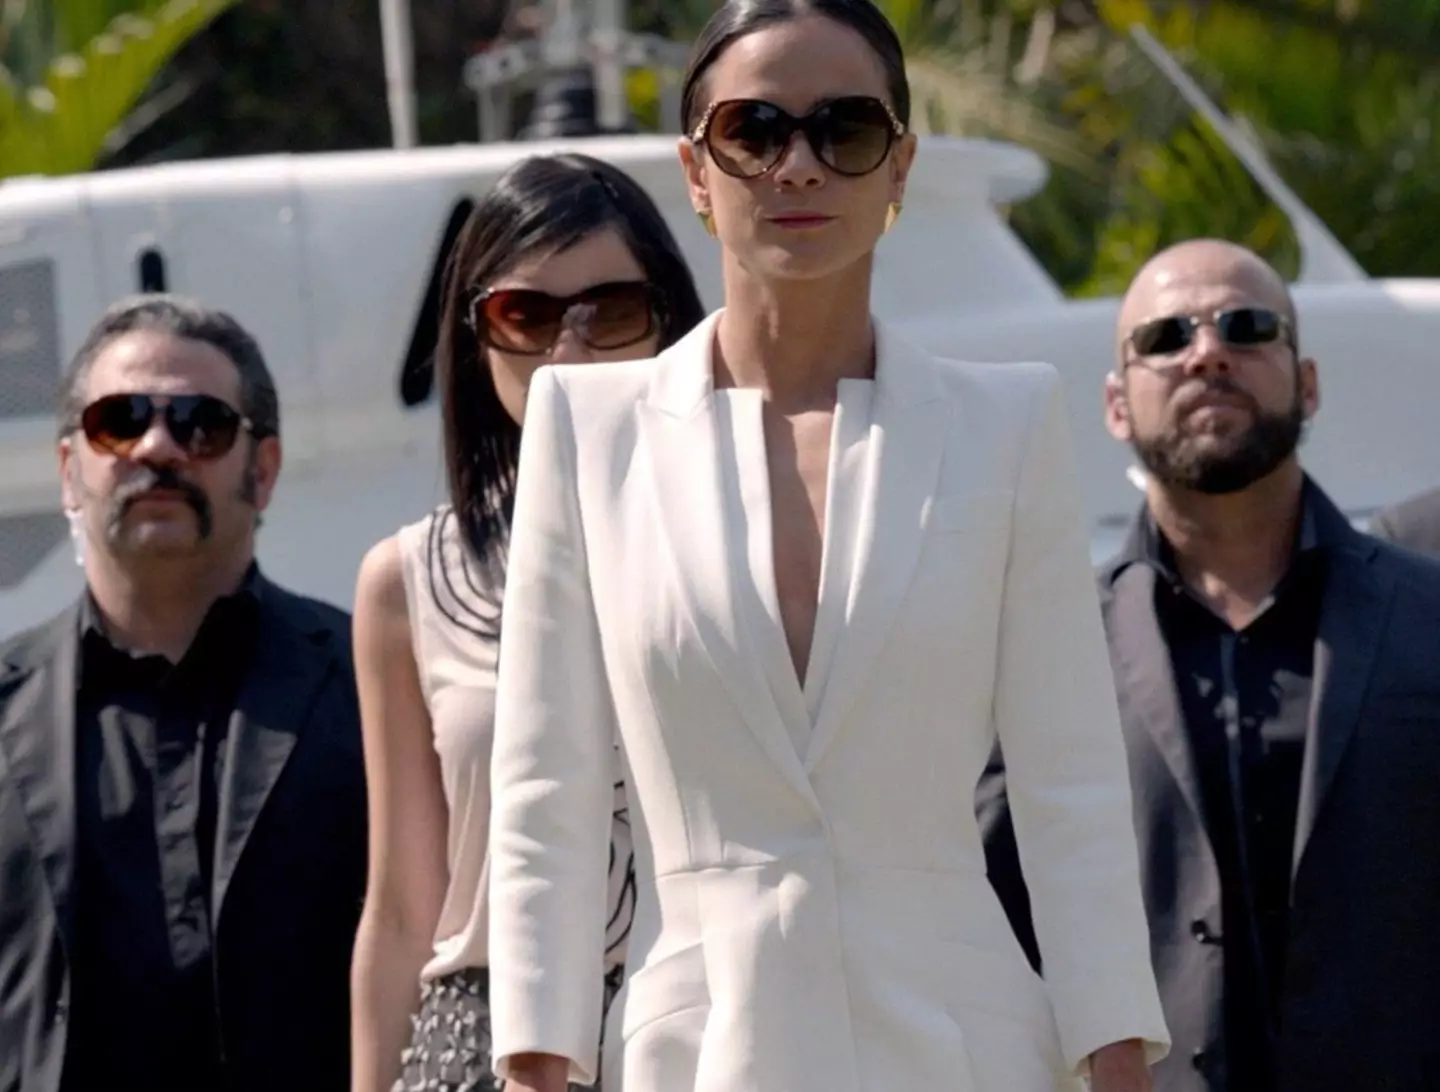 Queen of the South is streaming on Netflix now.